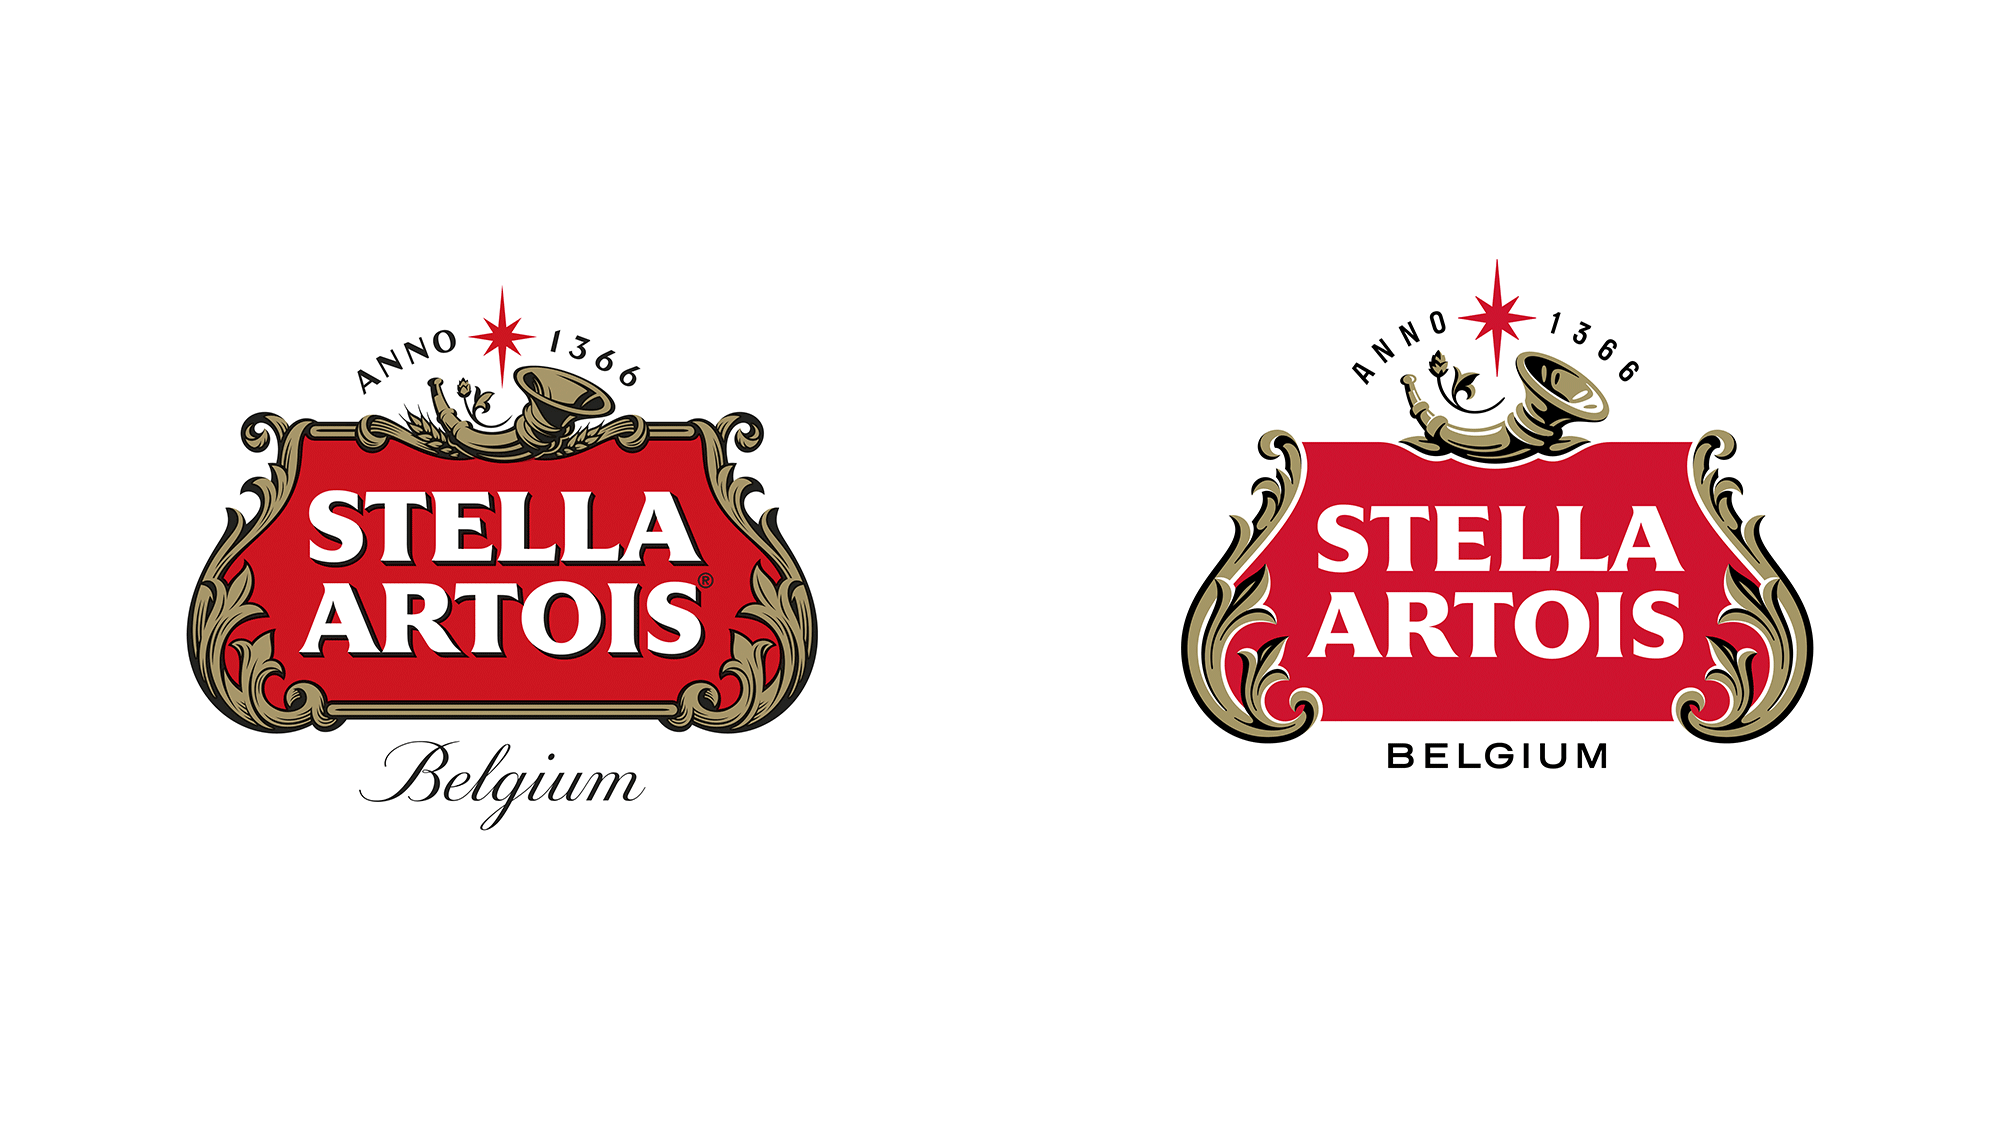 Brand New: New Identity for Stella Artois by Jones Knowles Ritchie